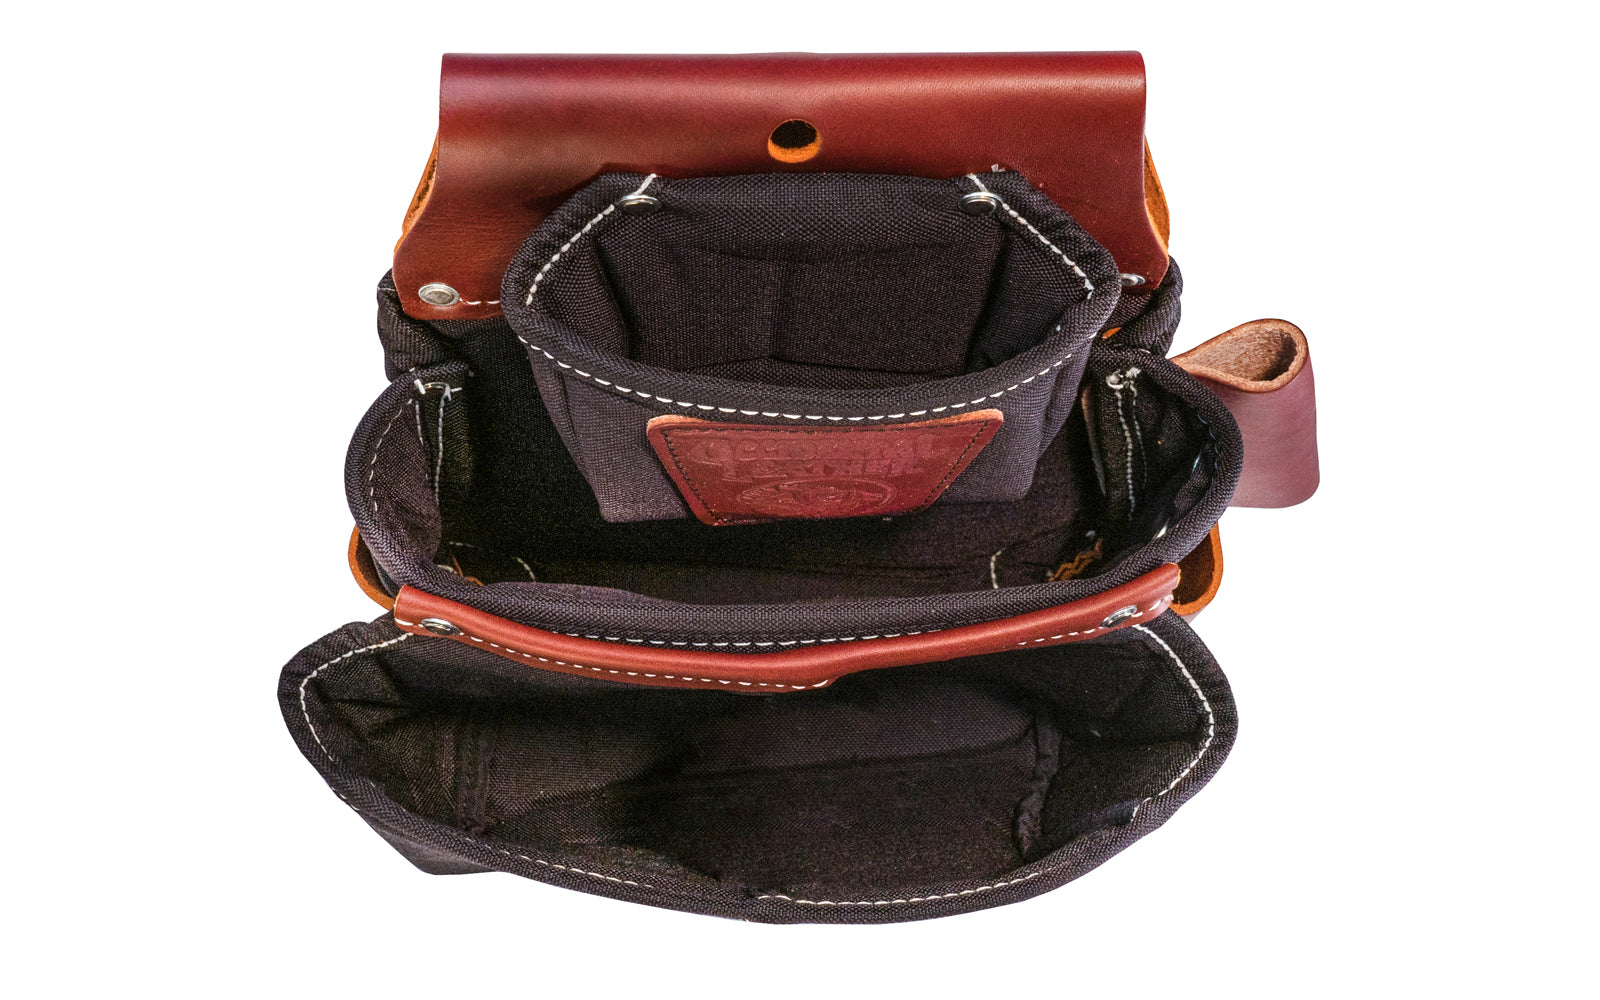 Occidental Leather "Oxy Lights" 3-Pouch Fastener Bag ~ Model B8060 - Fits a 3" work belt - Most popular "OxyLights" fastener bag. For framing & general carpentry applications. Holders for 1” blade square, angle square, cat’s paw loop, driver bits. Made of Nylon & genuine Leather - 9 total pockets & tool holders.